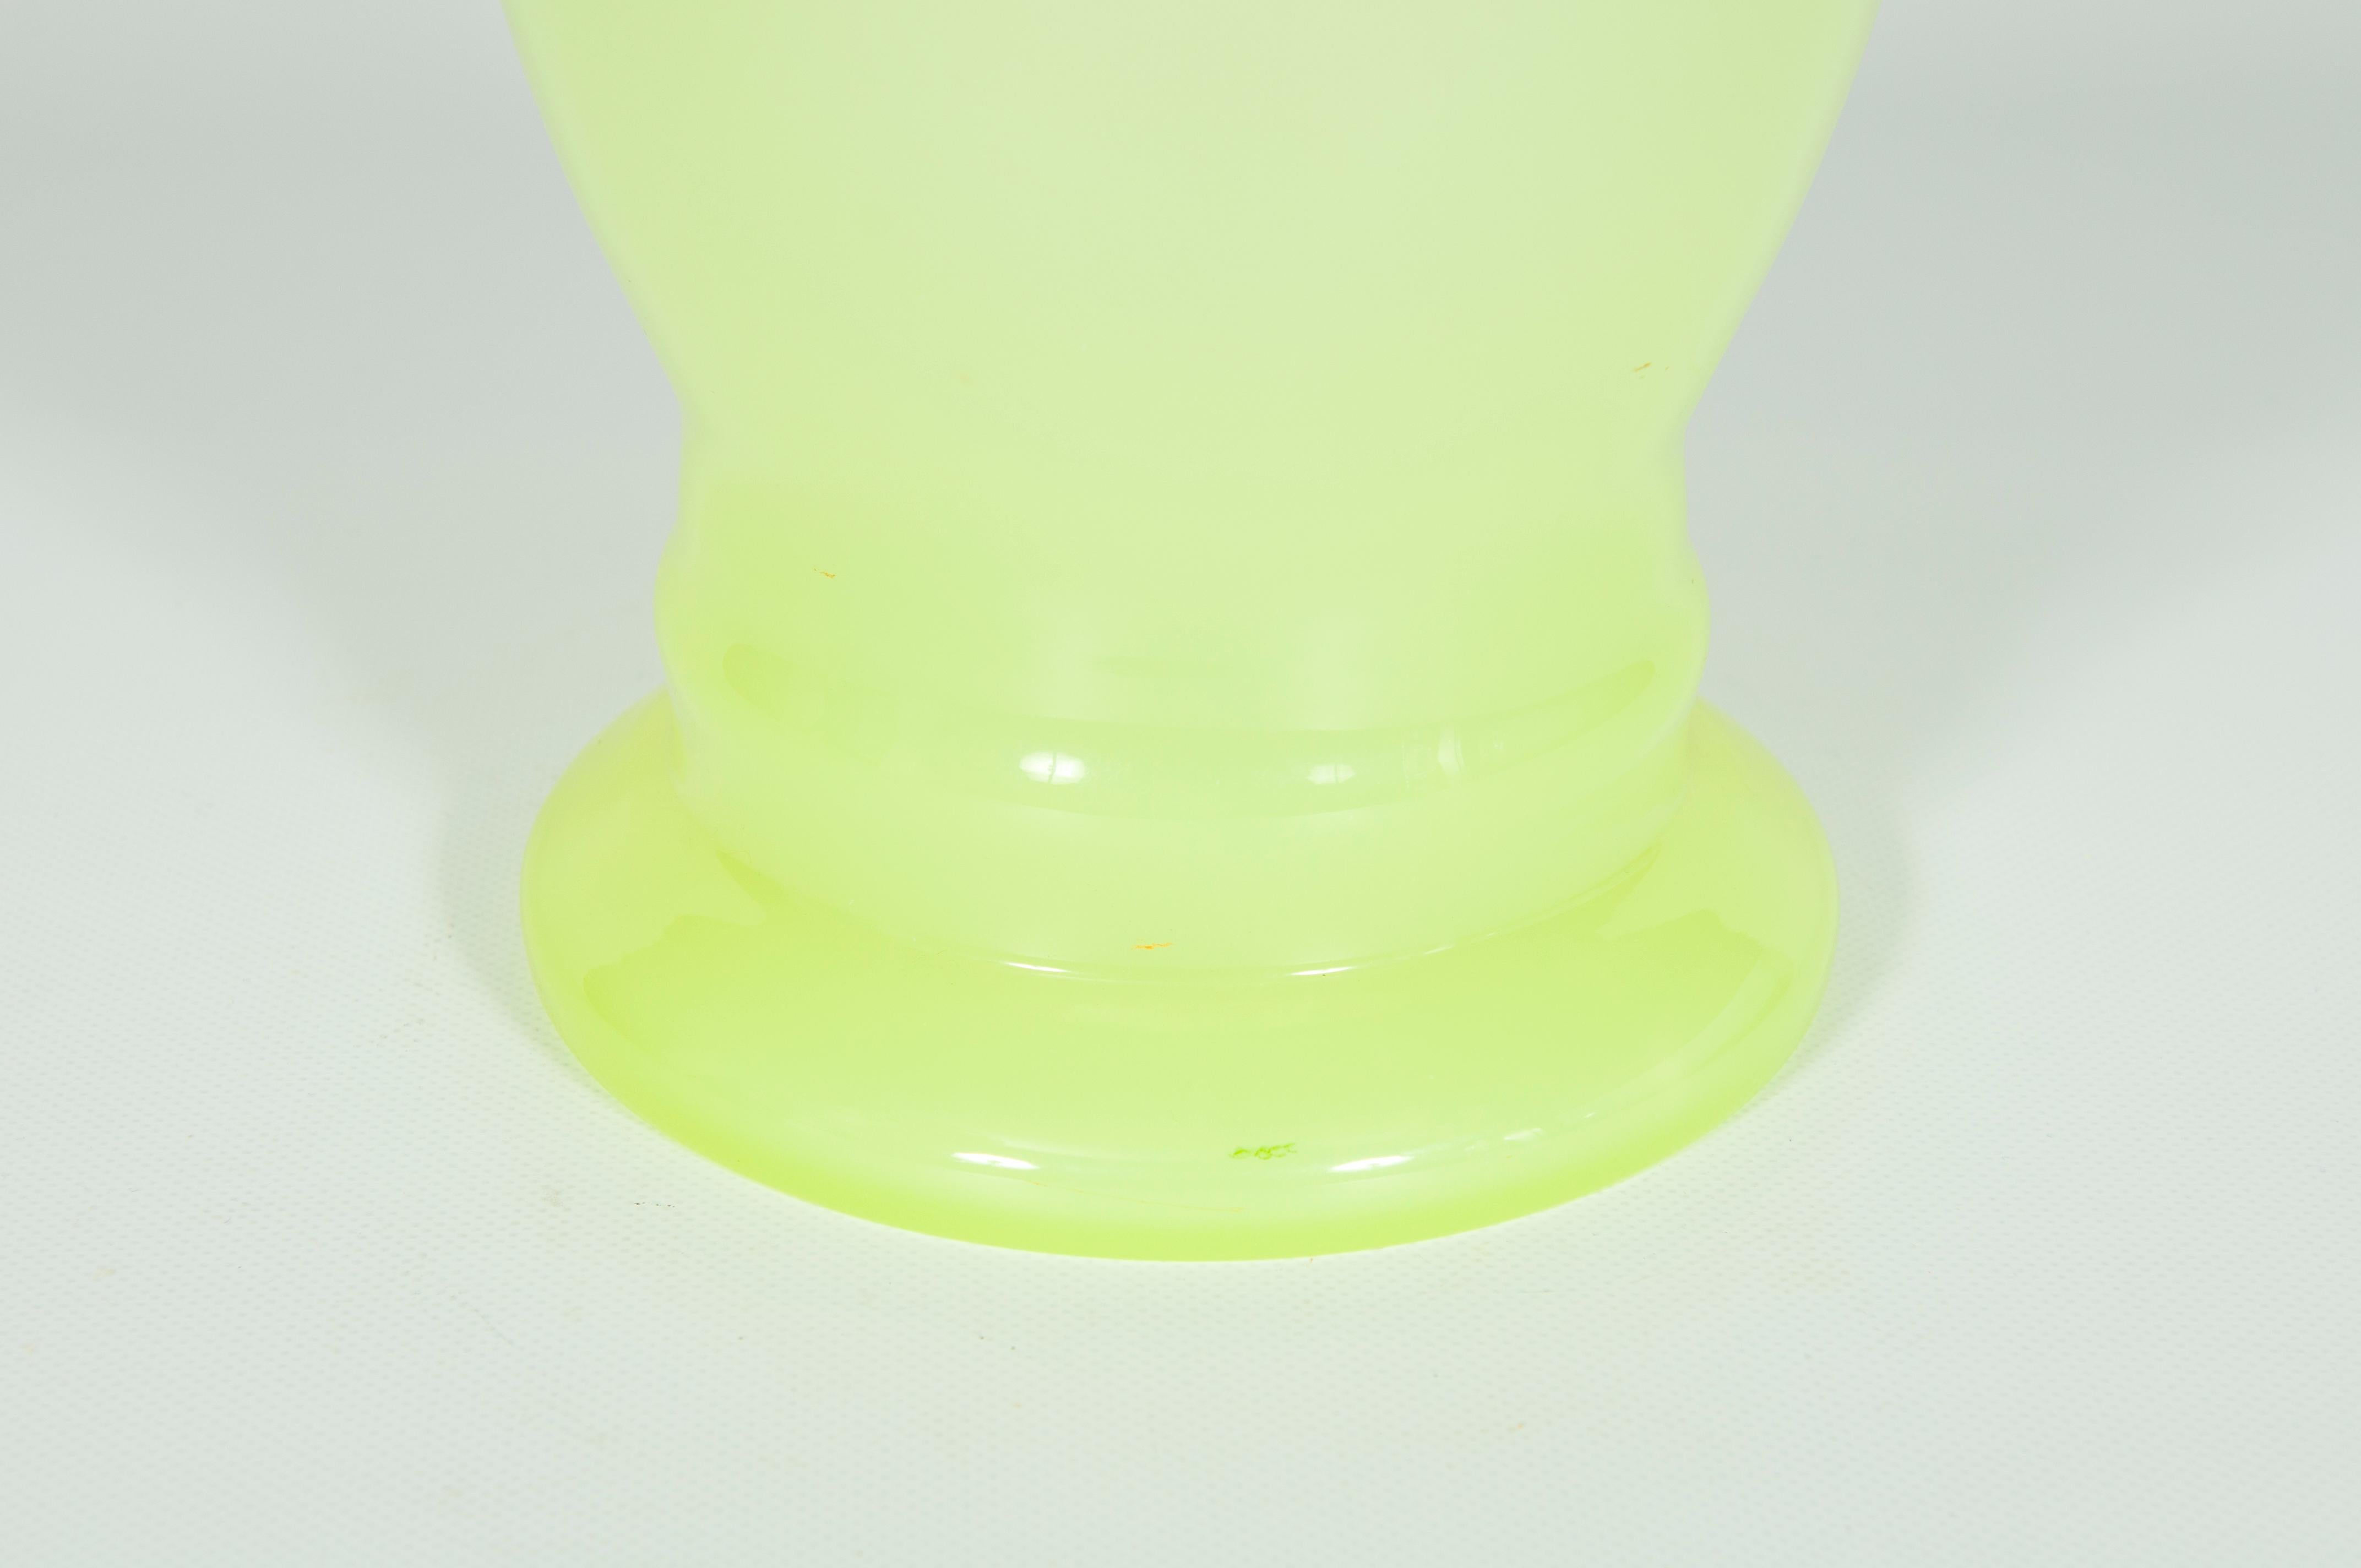 Pair of Fluorescent Yellow Murano Glass Vases Hand Painted and Decorated 1990s For Sale 8